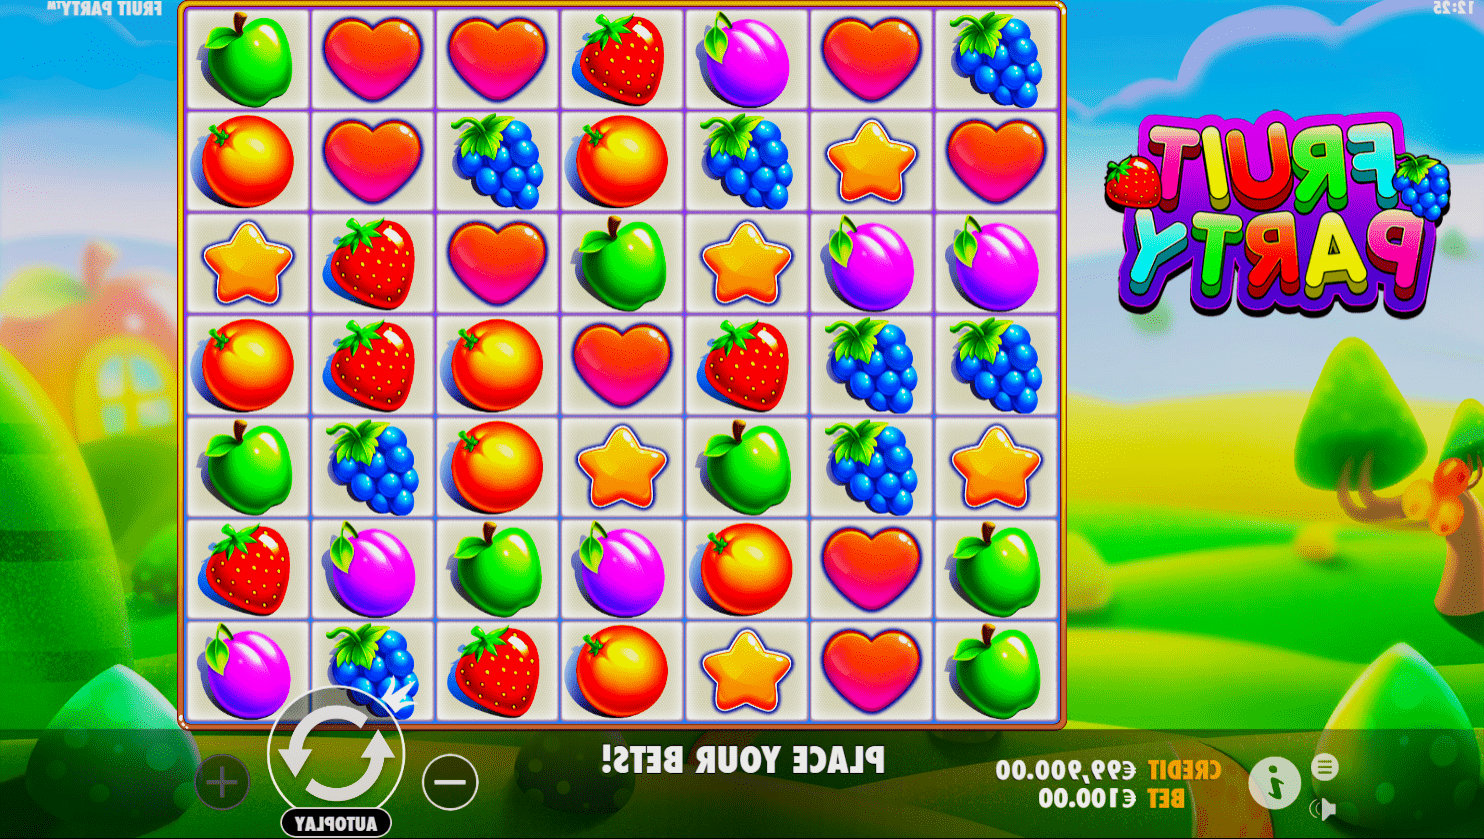 Slot Fruit Party Gameplay